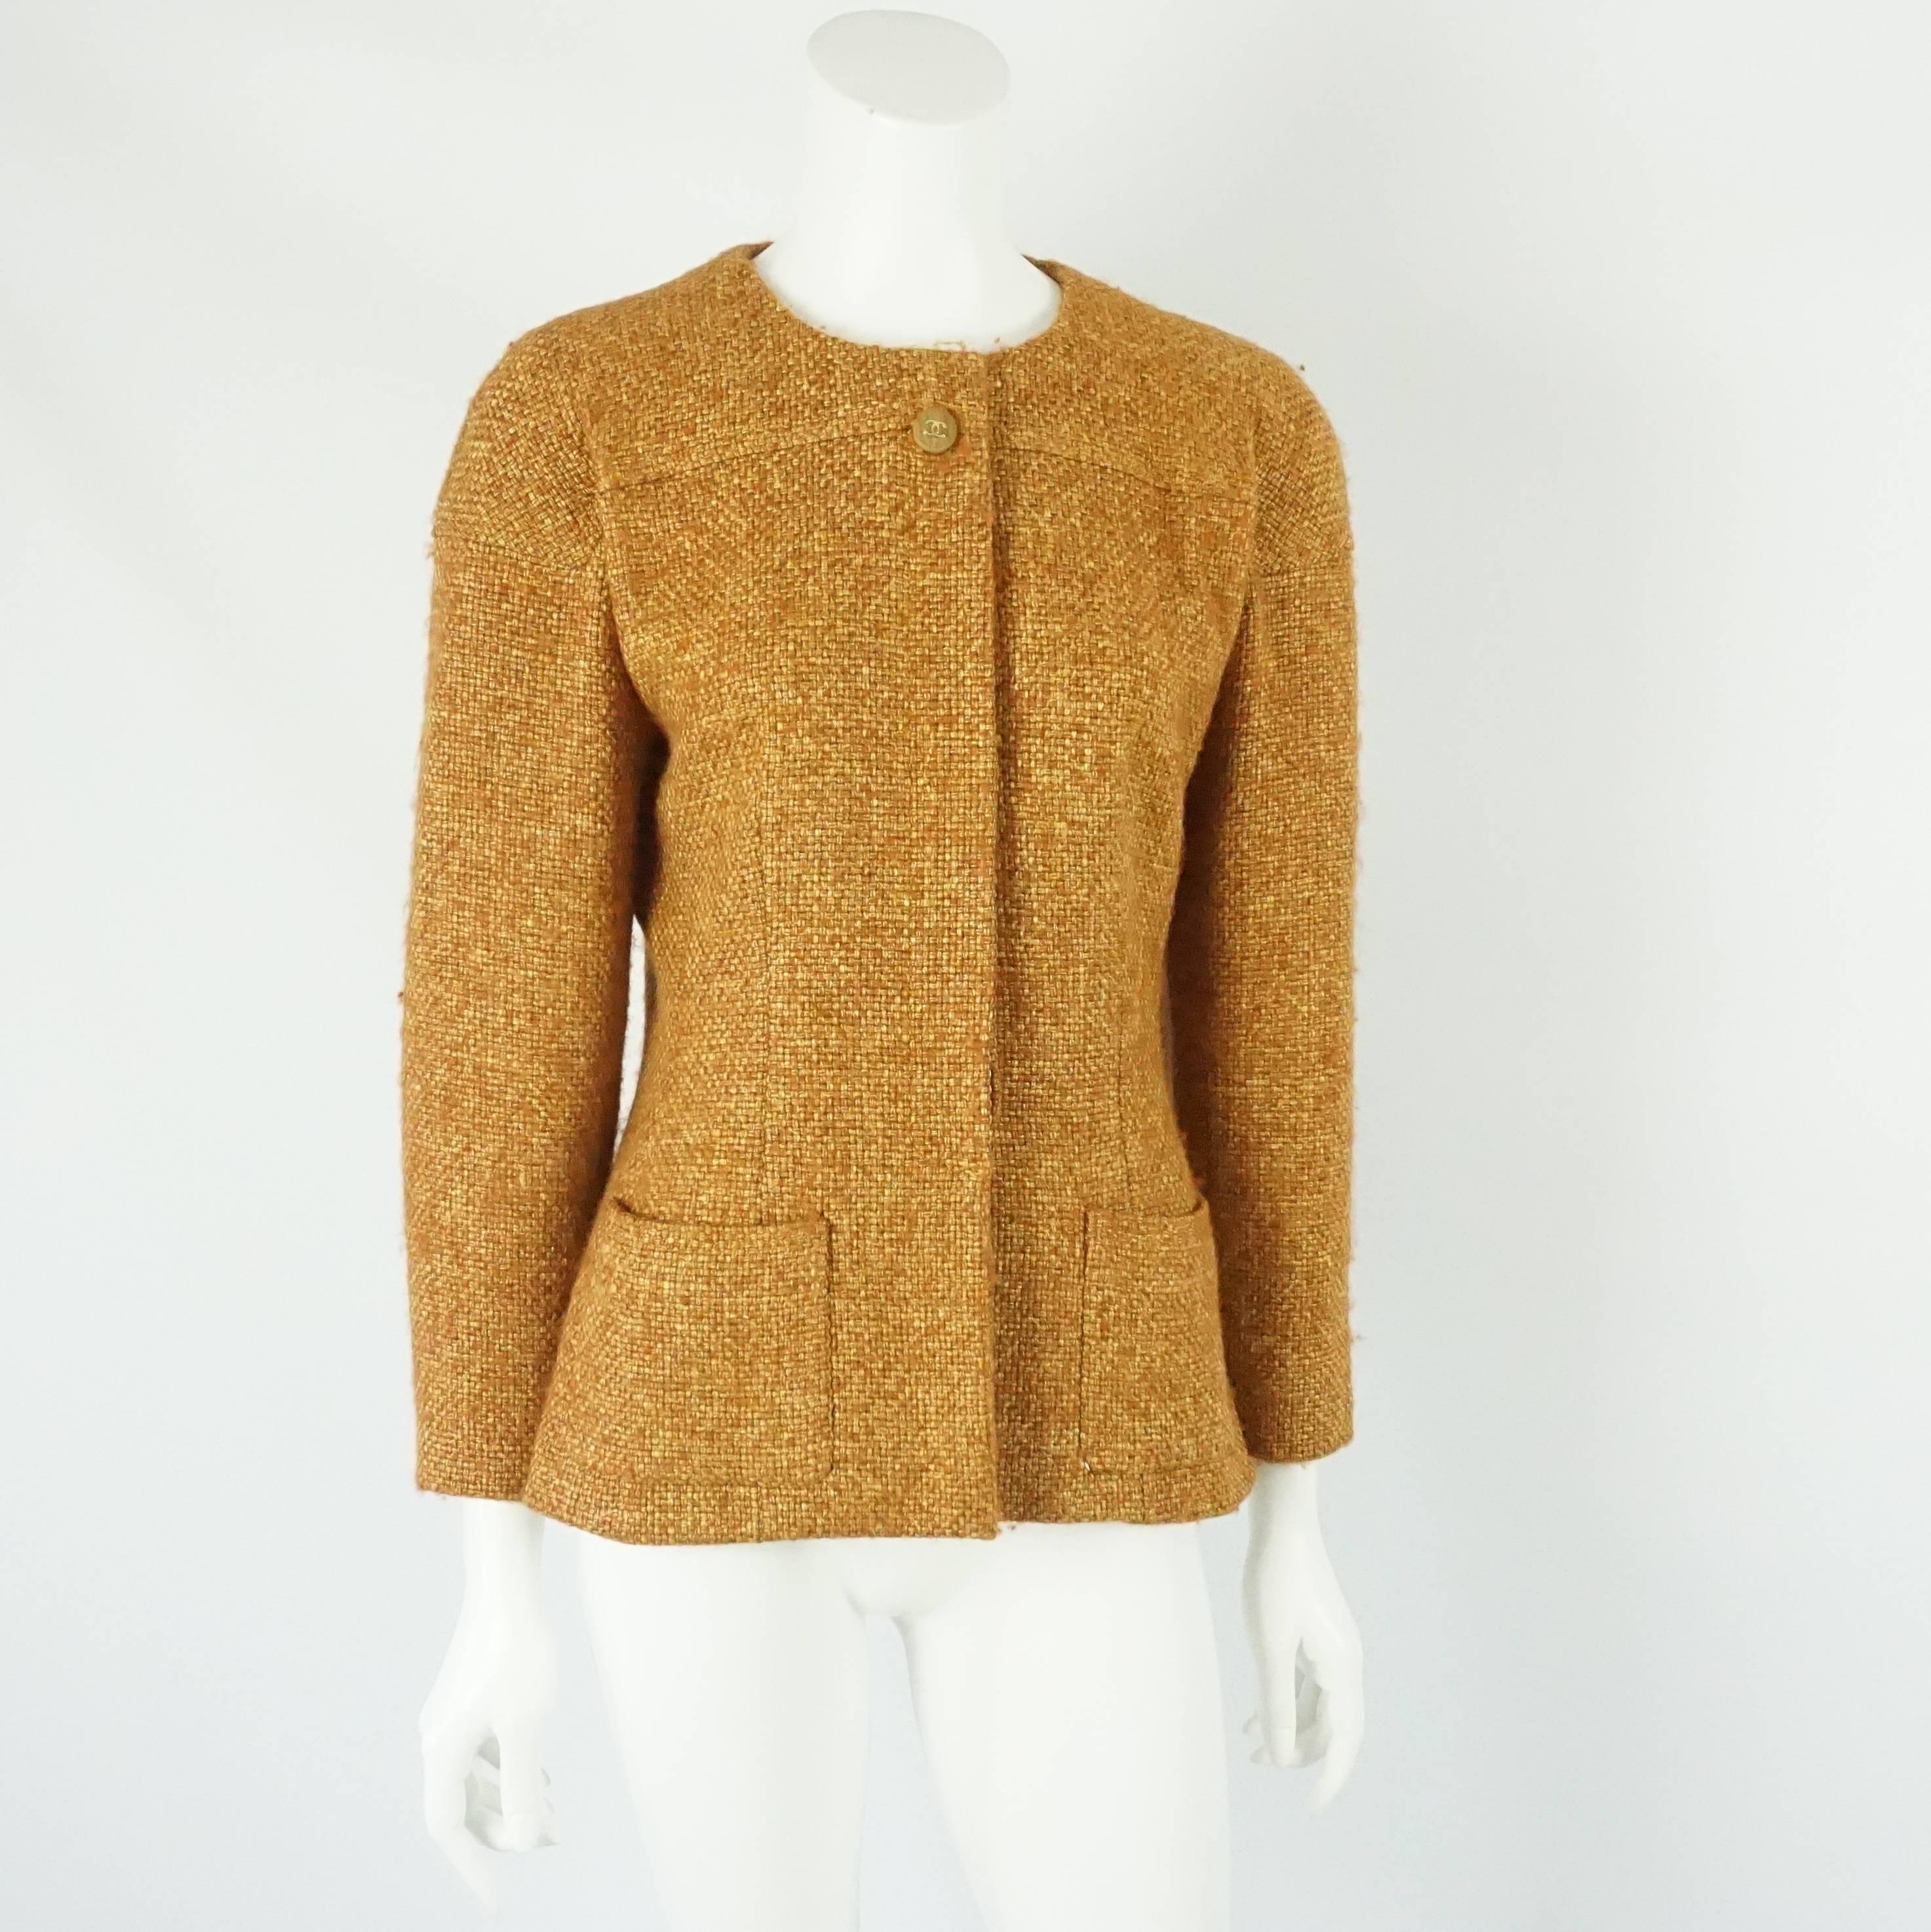 Chanel Burnt Orange Wool Blend Jacket with Removable Scarf/Tie - 38 - 01A. This jacket is a light burnt orange color. It has 2 front pockets at the bottom and 4 wooden 